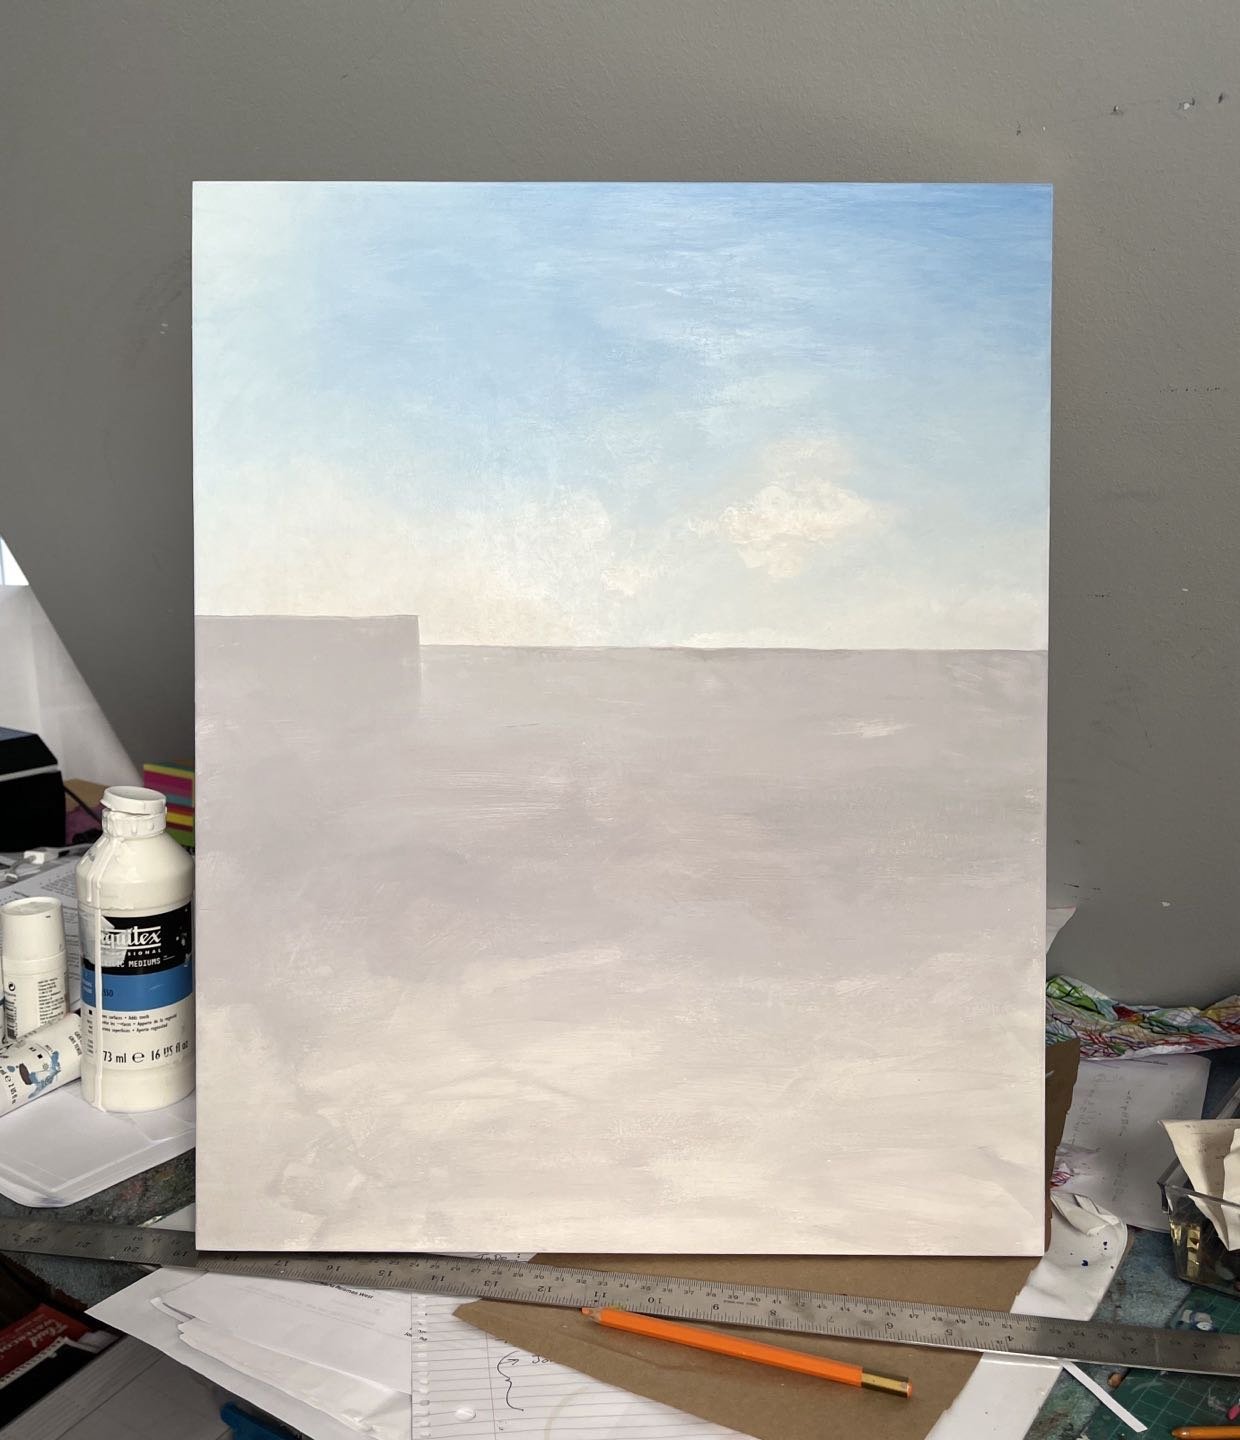 How it starts, sky first, always. I&rsquo;m working away on new stuff for the @torontooutdoorart fair at Nathan Phillips Square, July 12-14th. #nscad #torontoart #toaf63 #toaf